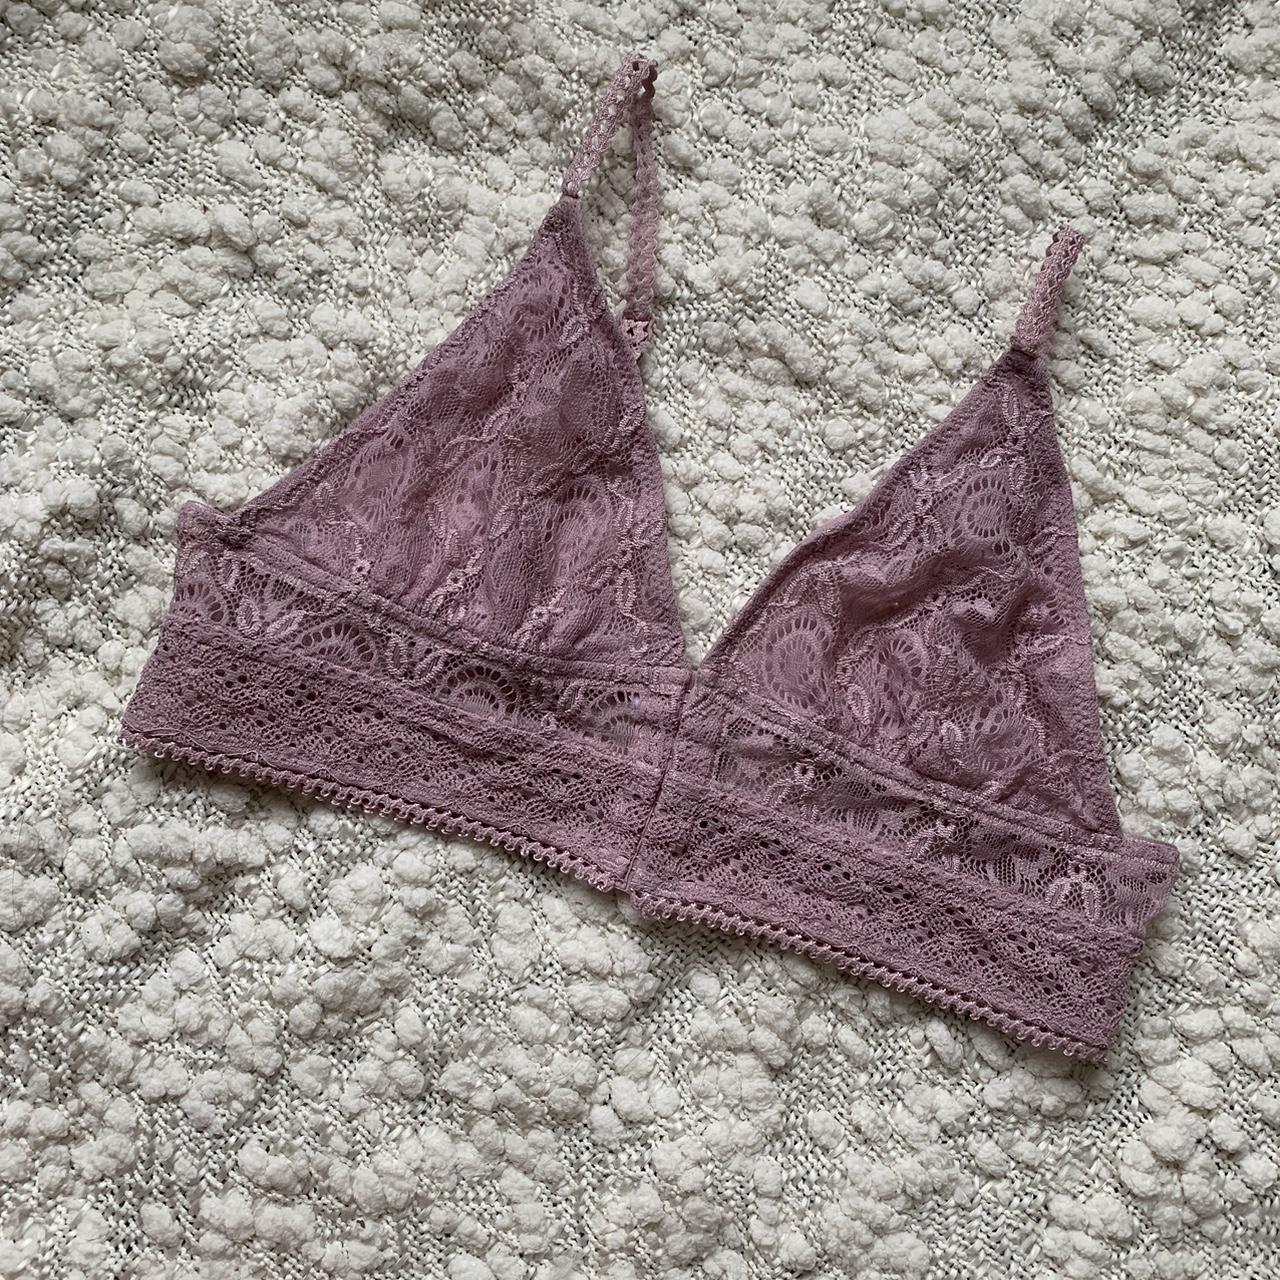 dark purple lace bralette with front buttons. - Depop